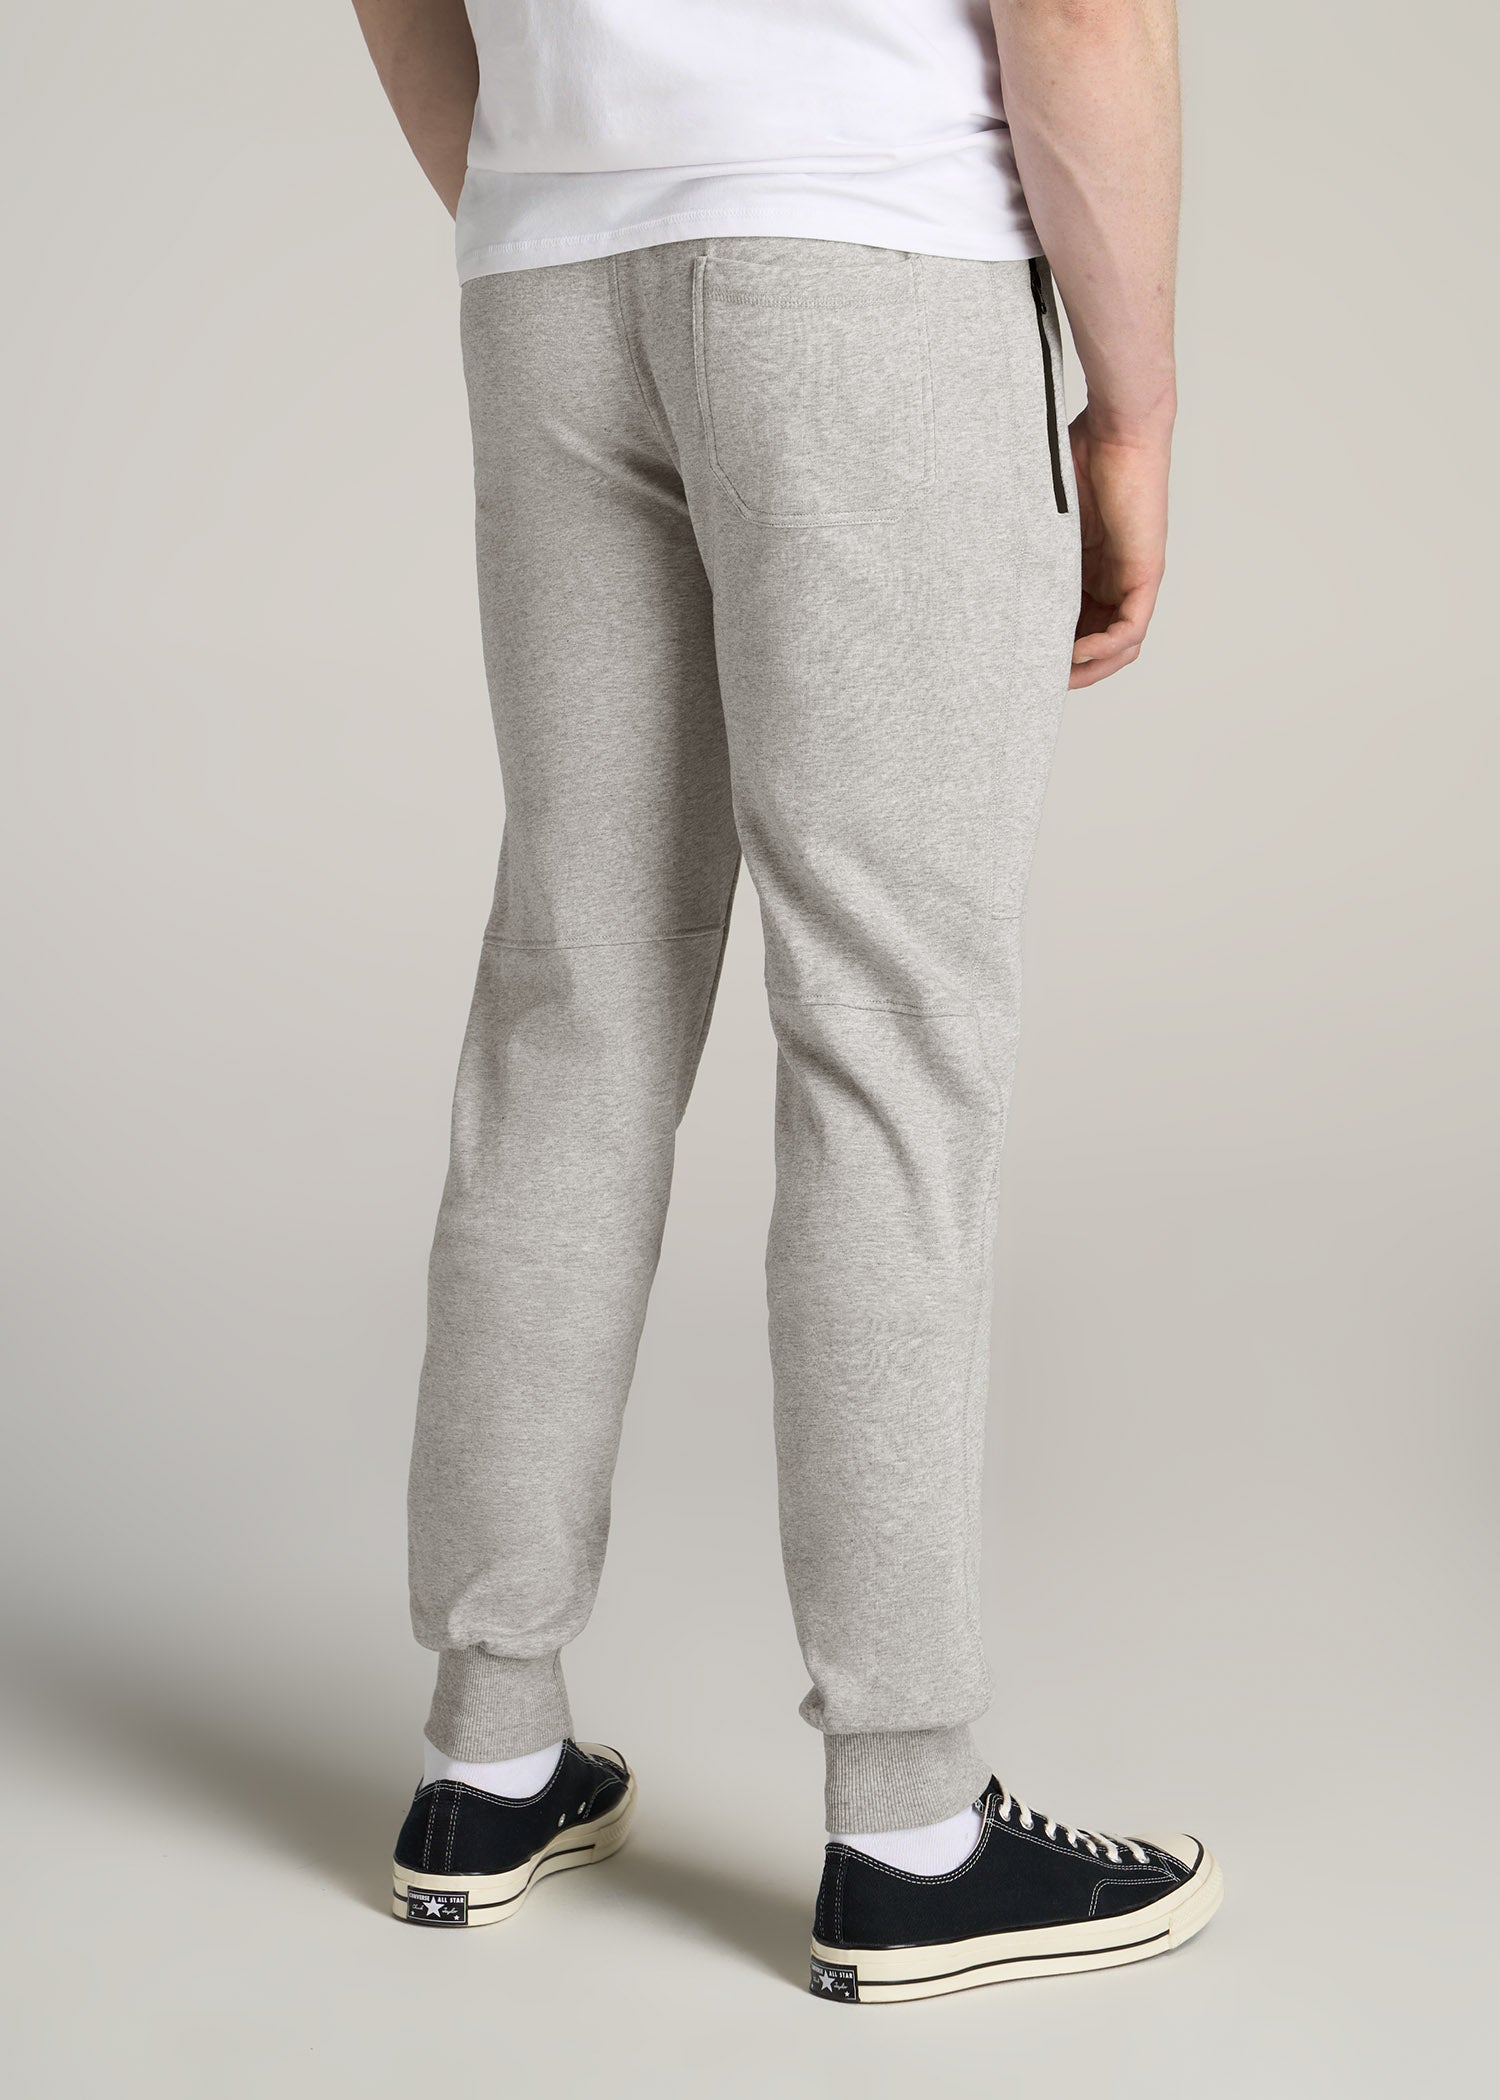 Wearever French Terry Men's Tall Joggers Grey Mix